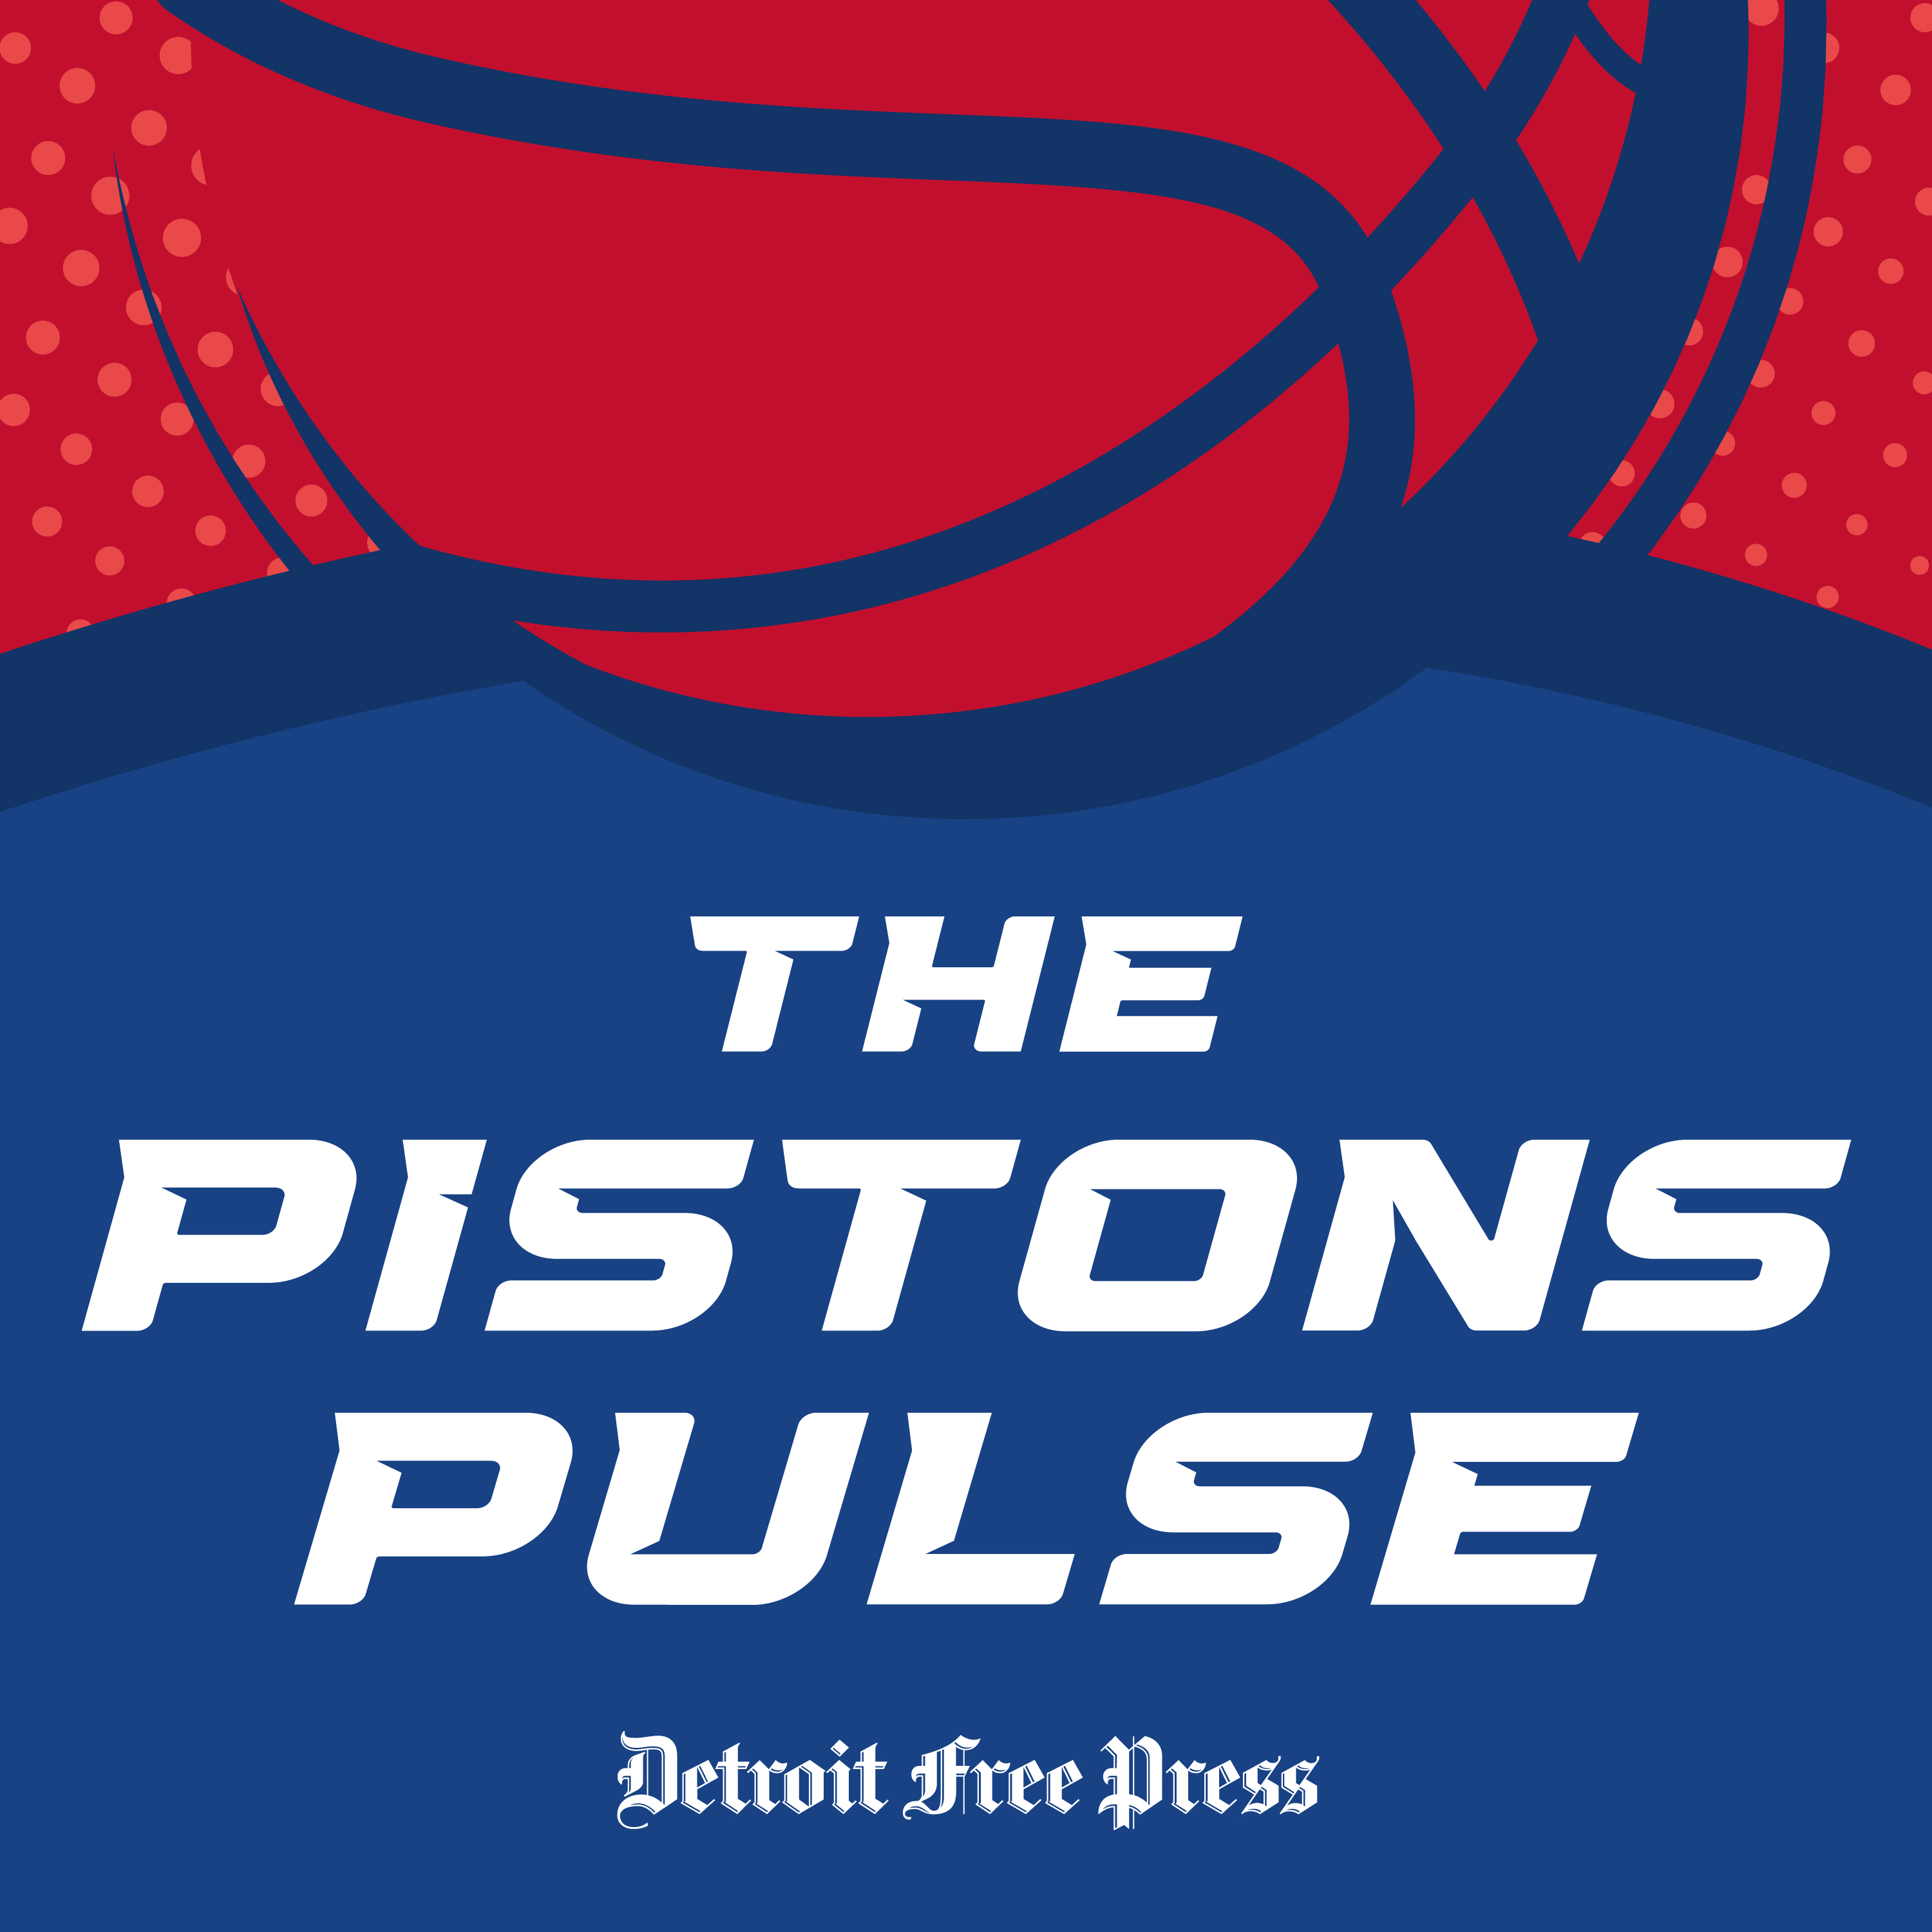 What we like (believe it or not), and don't like, about Pistons' season so far